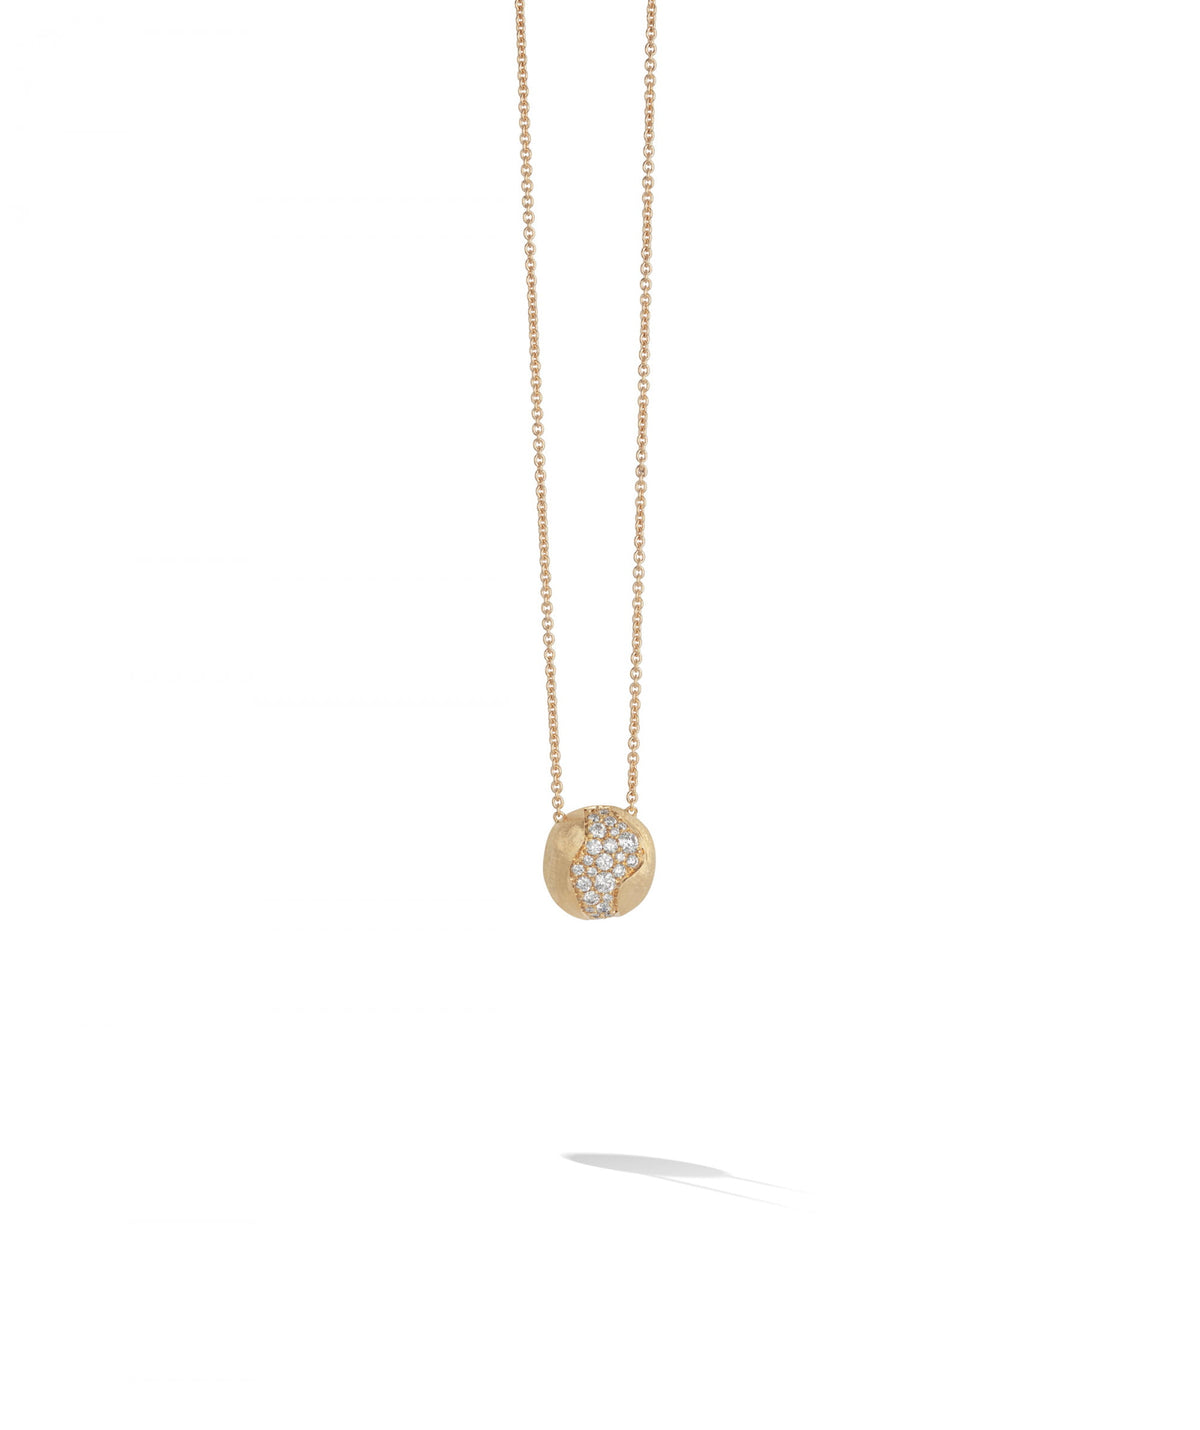 Marco Bicego Africa Constellation Necklace in 18k Yellow Gold with Diamonds Short - Orsini Jewellers NZ